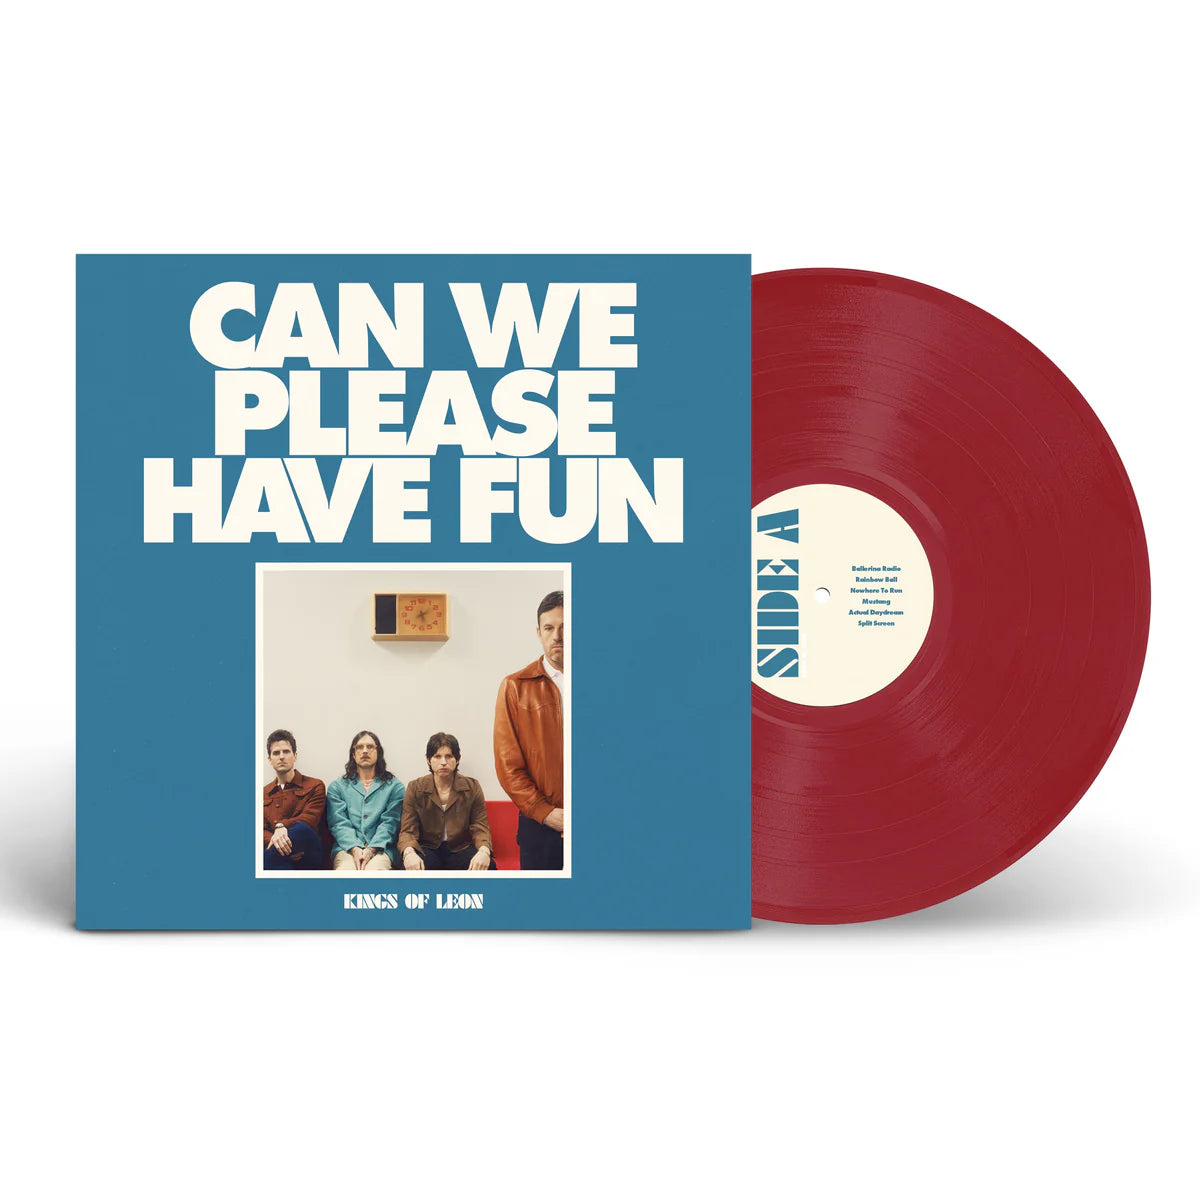 Kings Of Leon – Can We Please Have Fun LP (Limited Edition Opaque Apple Vinyl)